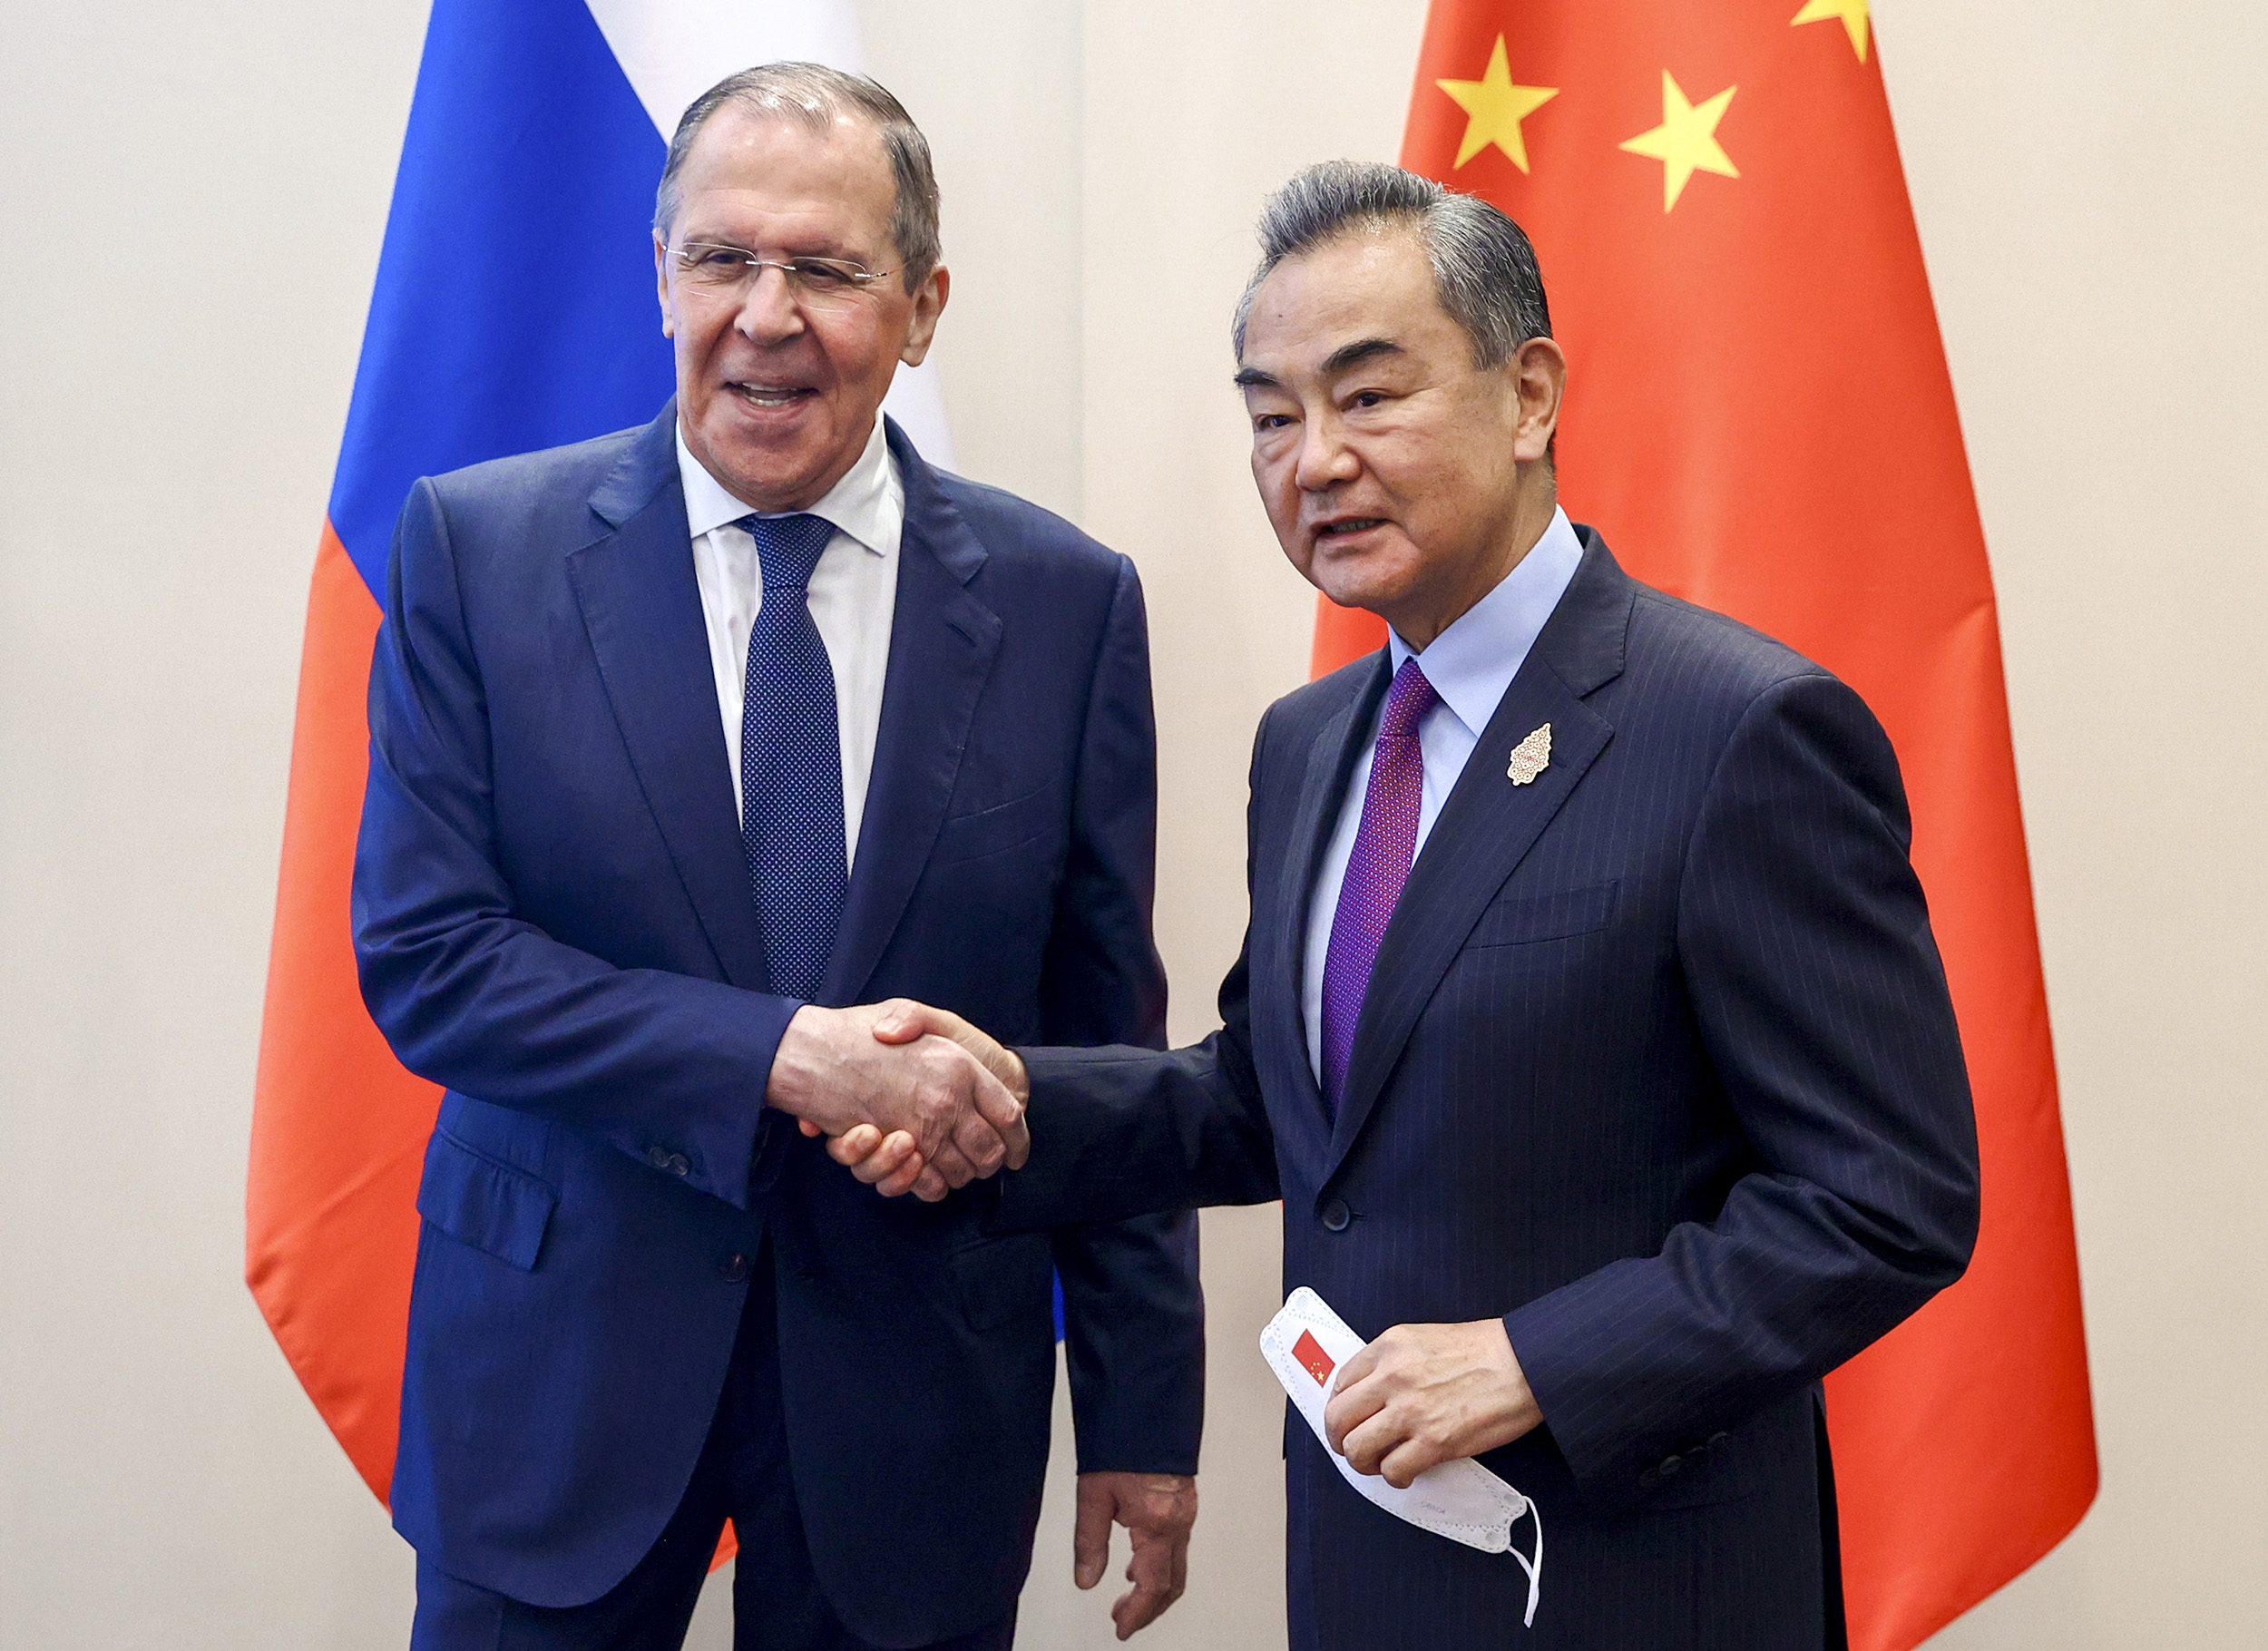 Russian Foreign Minister Sergey Lavrov, left, shakes hands with Chinese Foreign Minister Wang Yi during their bilateral meeting ahead of the G20 Foreign Ministers' Meeting in Nusa Dua, Bali, Indonesia, on July 7.